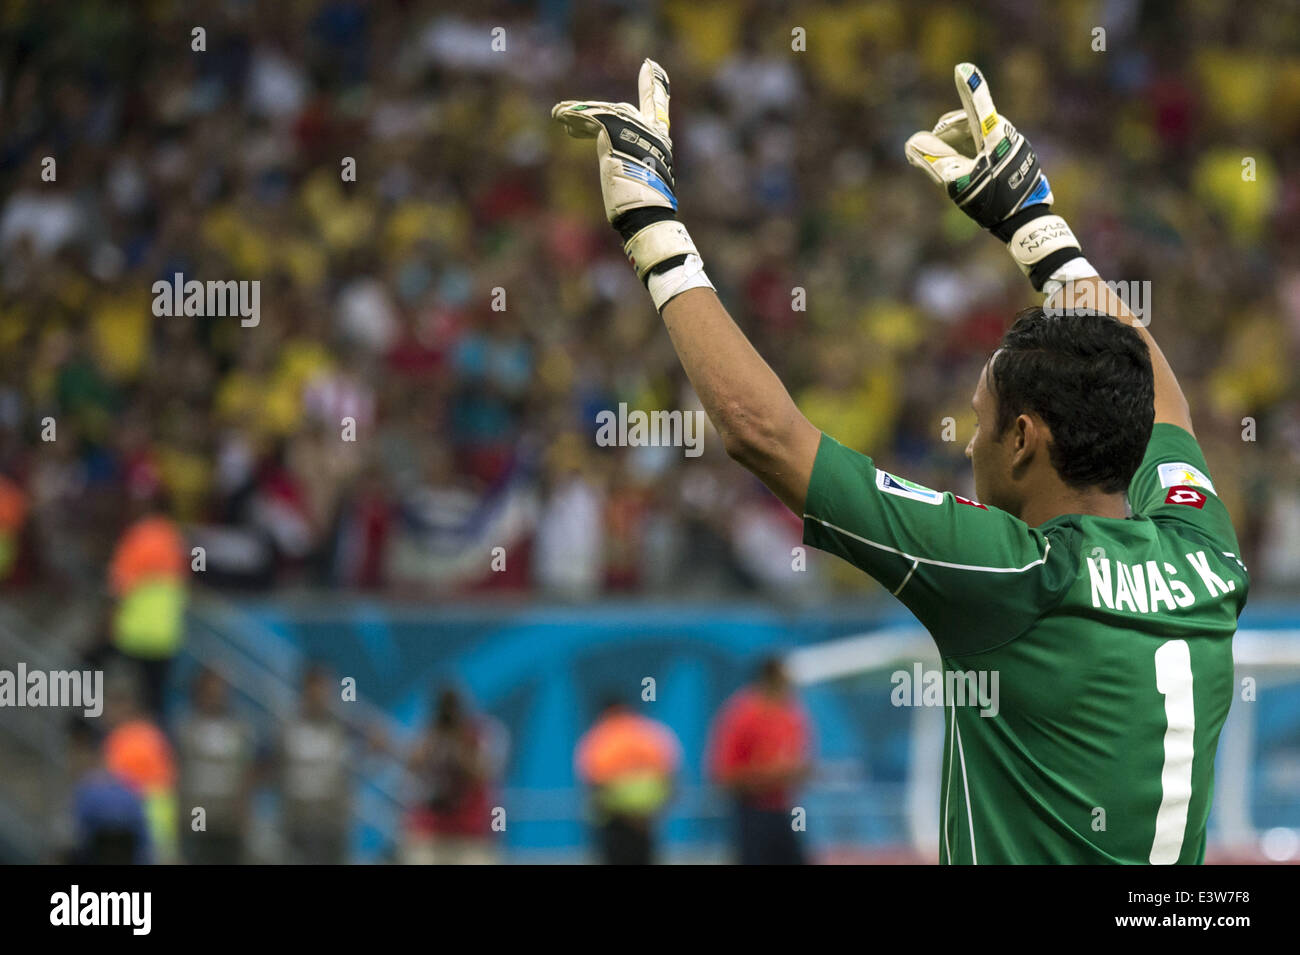 Recife, Brazil. 29th June, 2014. Keylor Navas (CRC) Football/Soccer : Keylor Navas of Costa Rica celebrates after saving Theofanis Gekas' penalty in the penalty shoot-out during the FIFA World Cup Brazil 2014 Round of 16 match between Costa Rica 1(5-3)1 Greece at Arena Pernambuco in Recife, Brazil . Credit:  Maurizio Borsari/AFLO/Alamy Live News Stock Photo